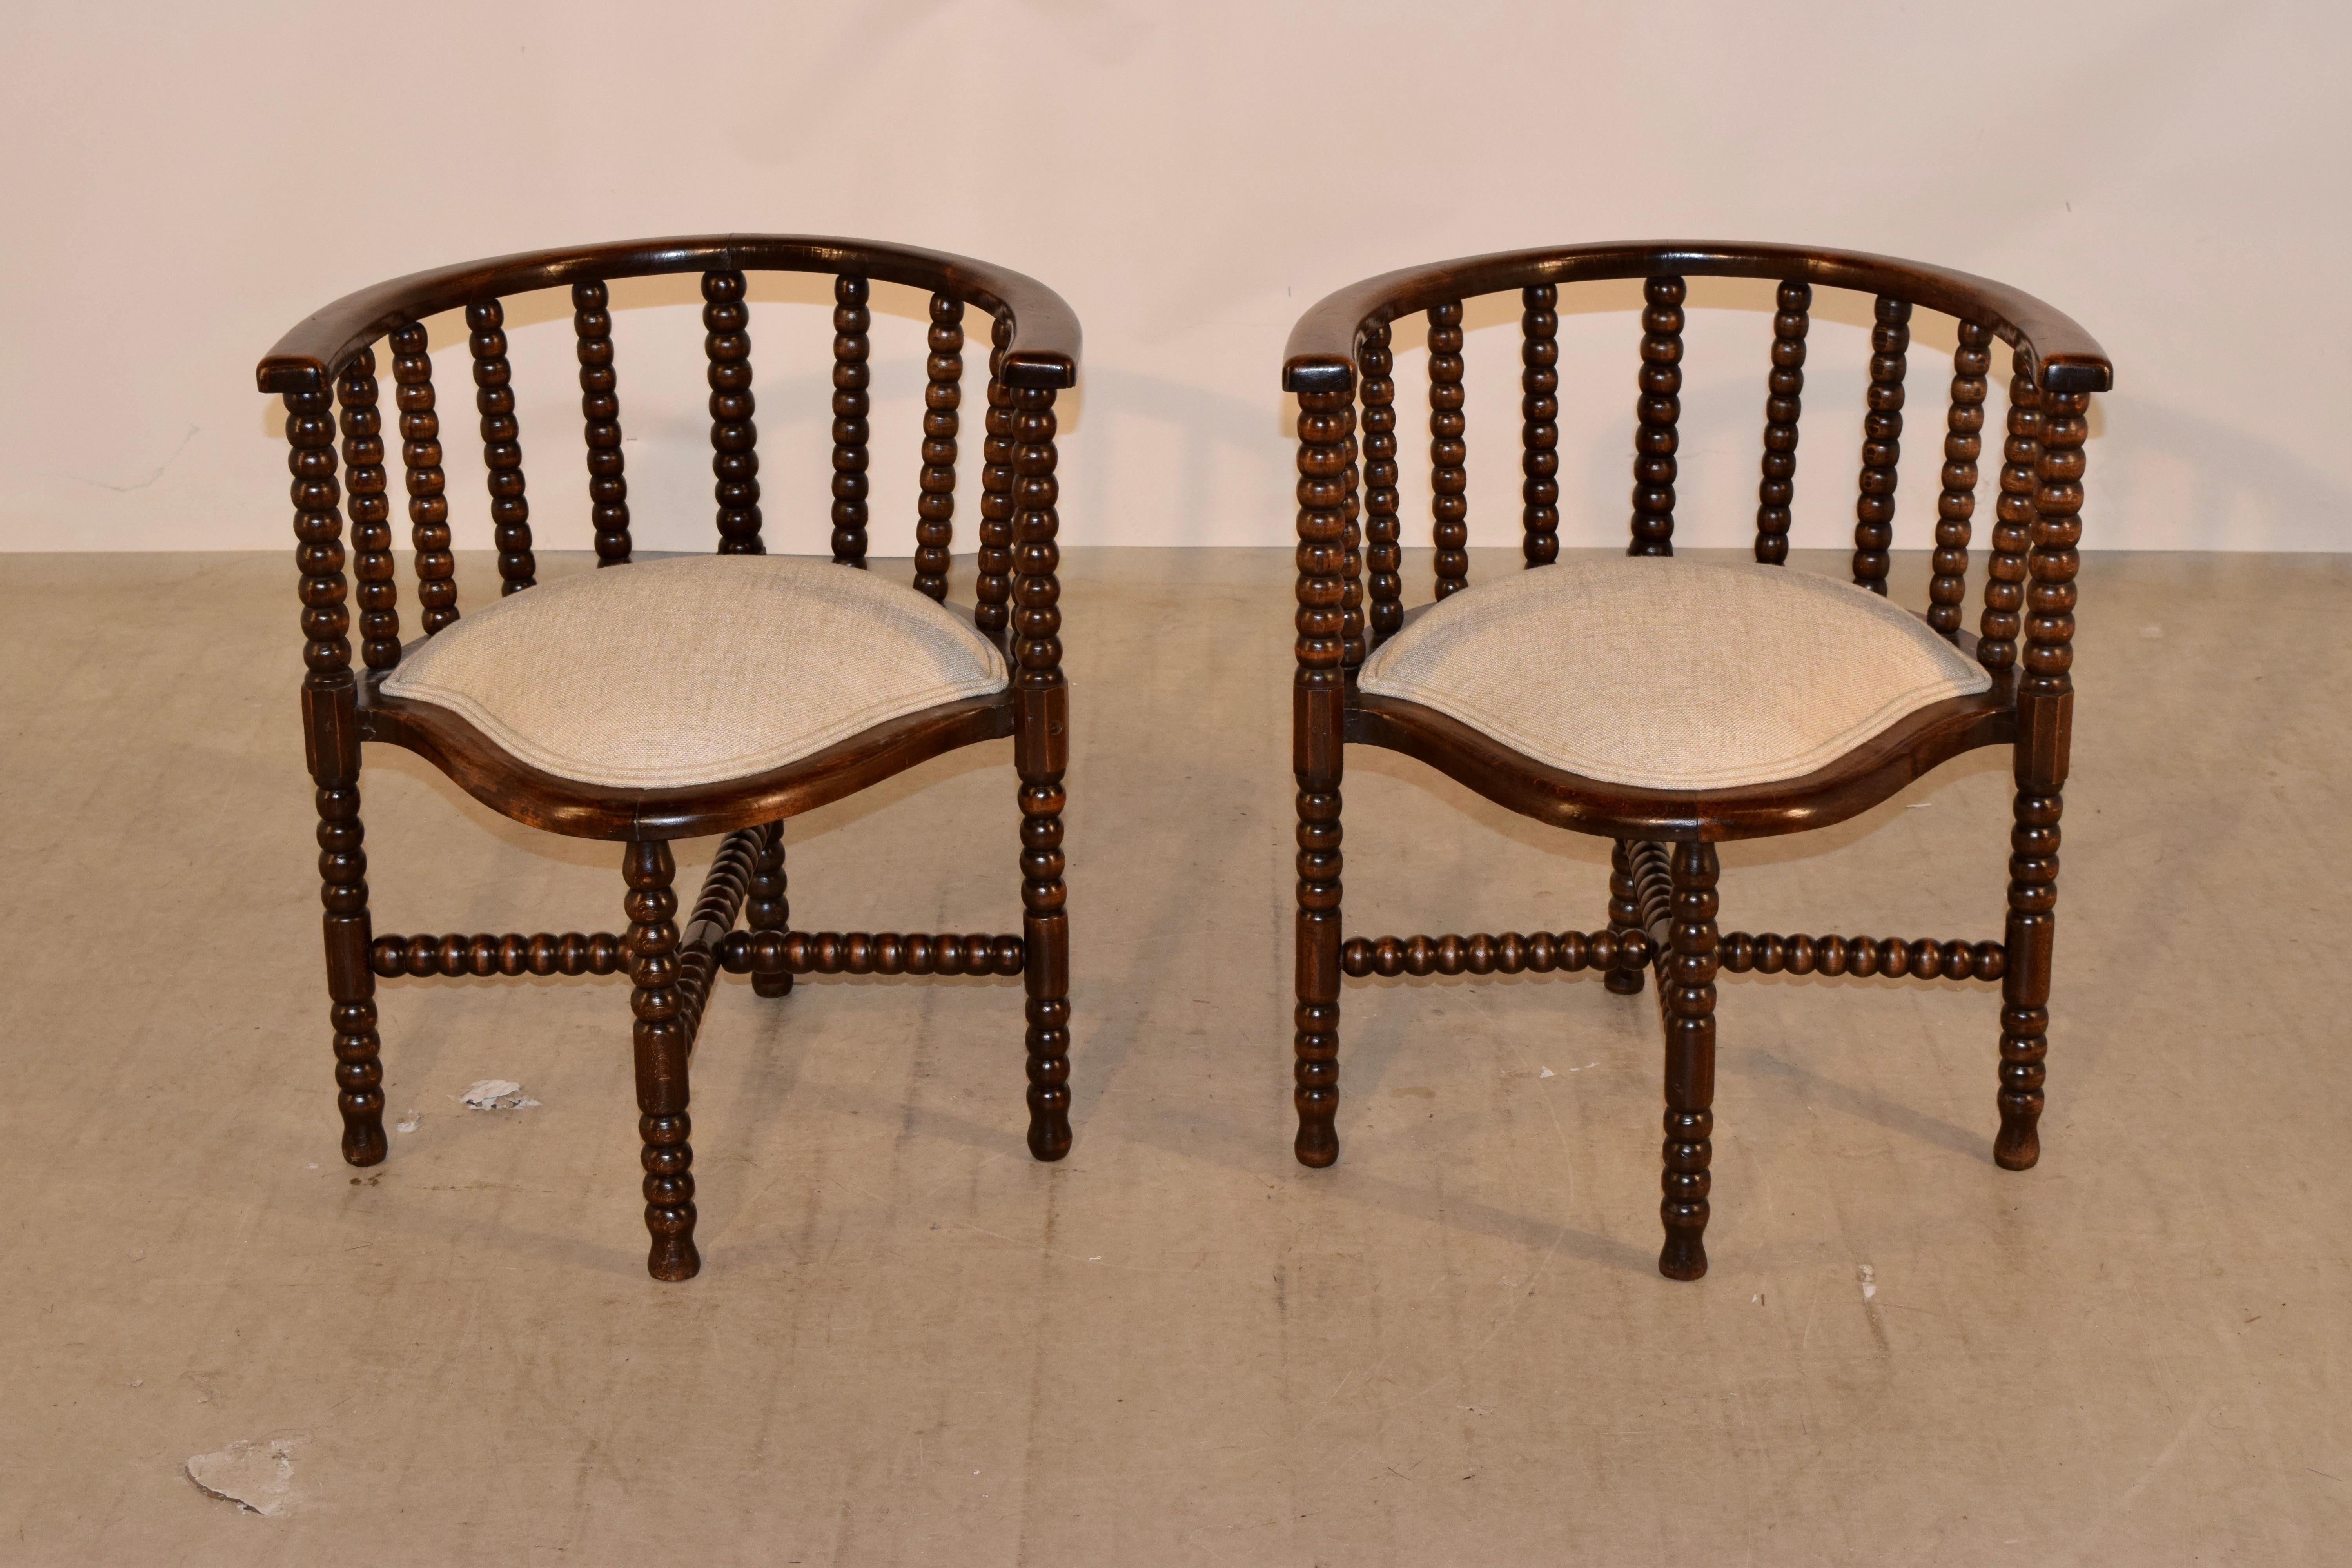 Pair of 19th century oak bobbin chairs from France. They have a wonderfully curved back design and hand-turned bobbin spindles. The seats have lovely scalloped shapes and are newly upholstered in linen. They are finished with a double welt. The legs